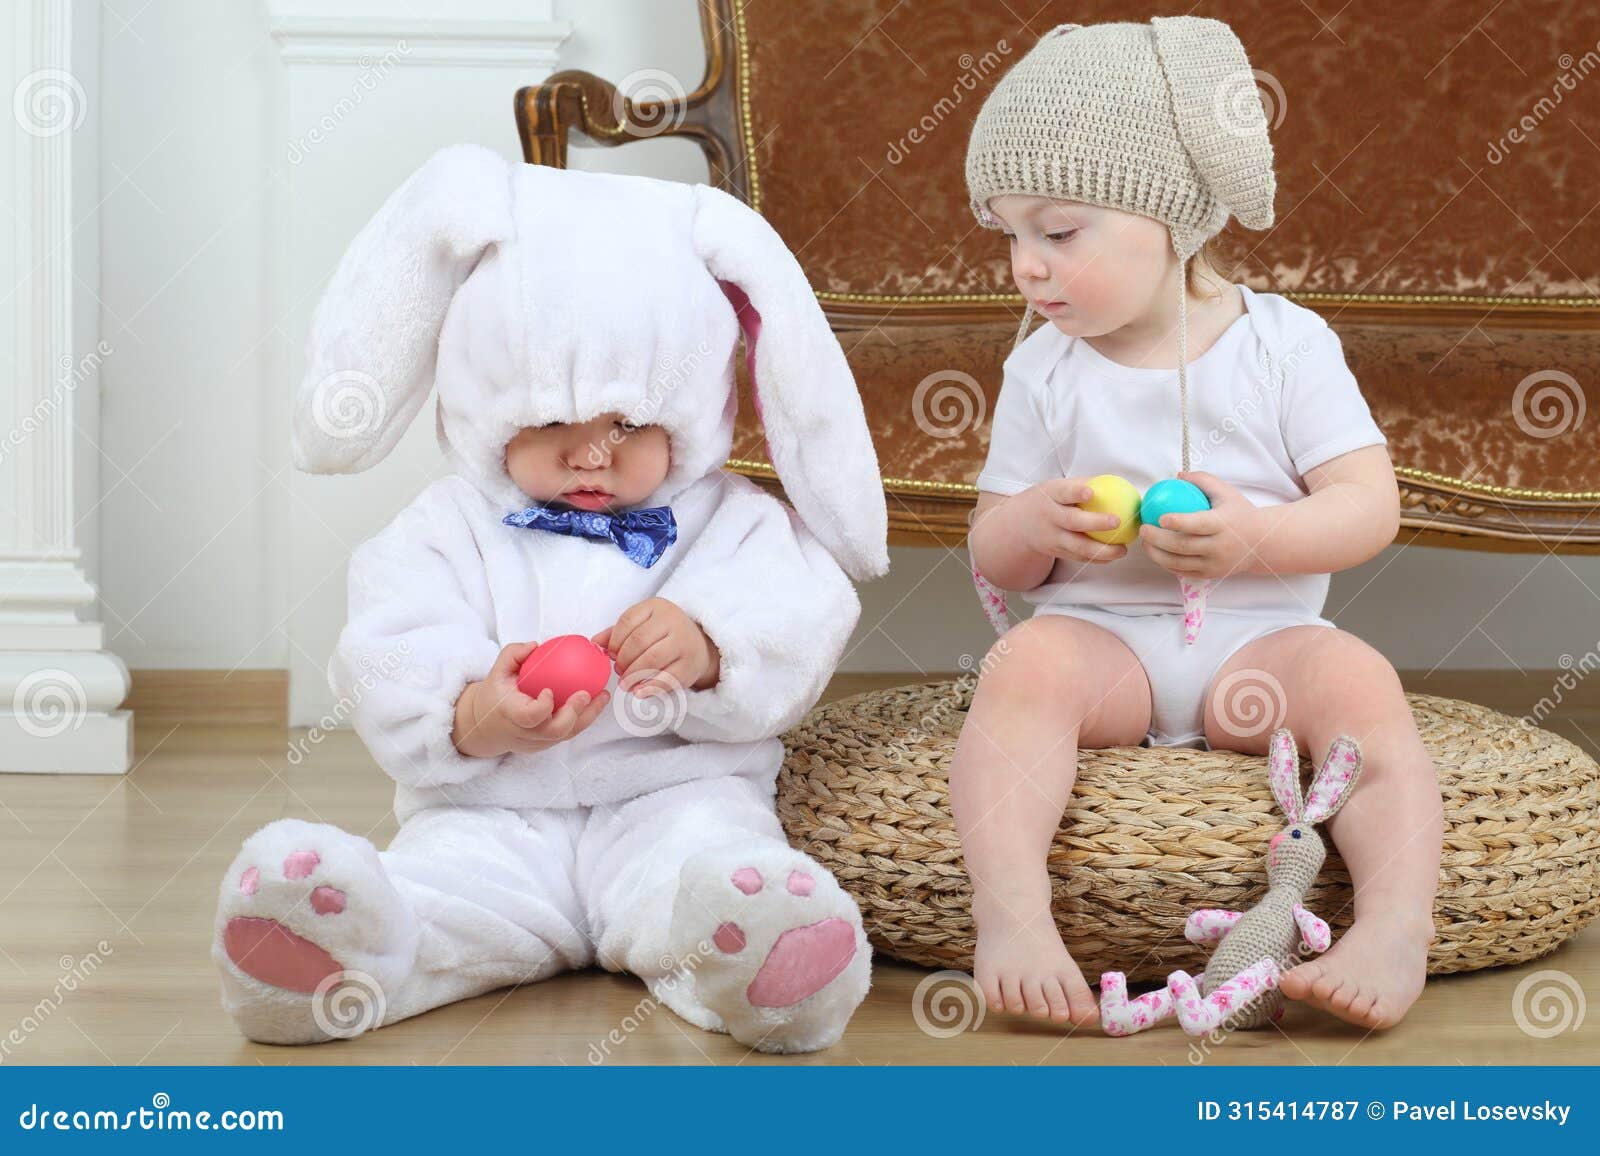 little boy and girl in costumes bunny sitting on